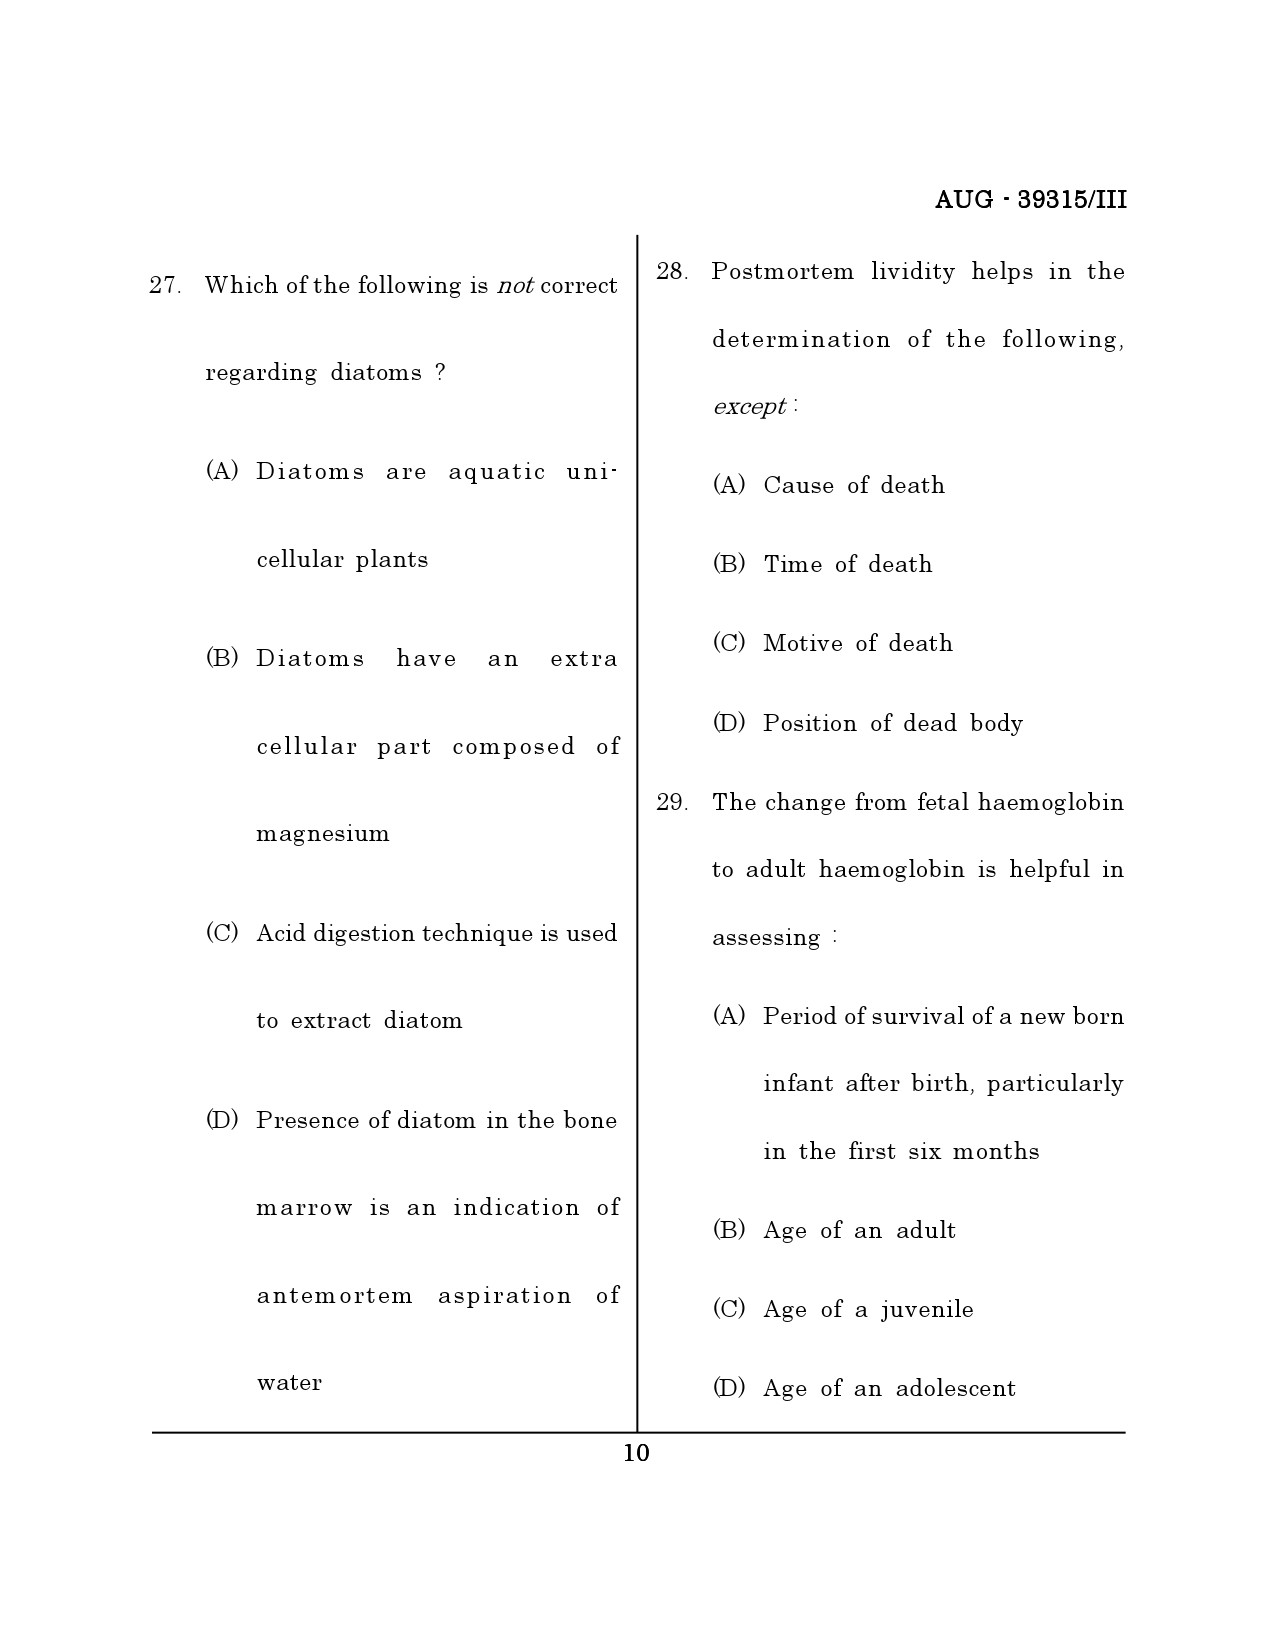 Maharashtra SET Forensic Science Question Paper III August 2015 9